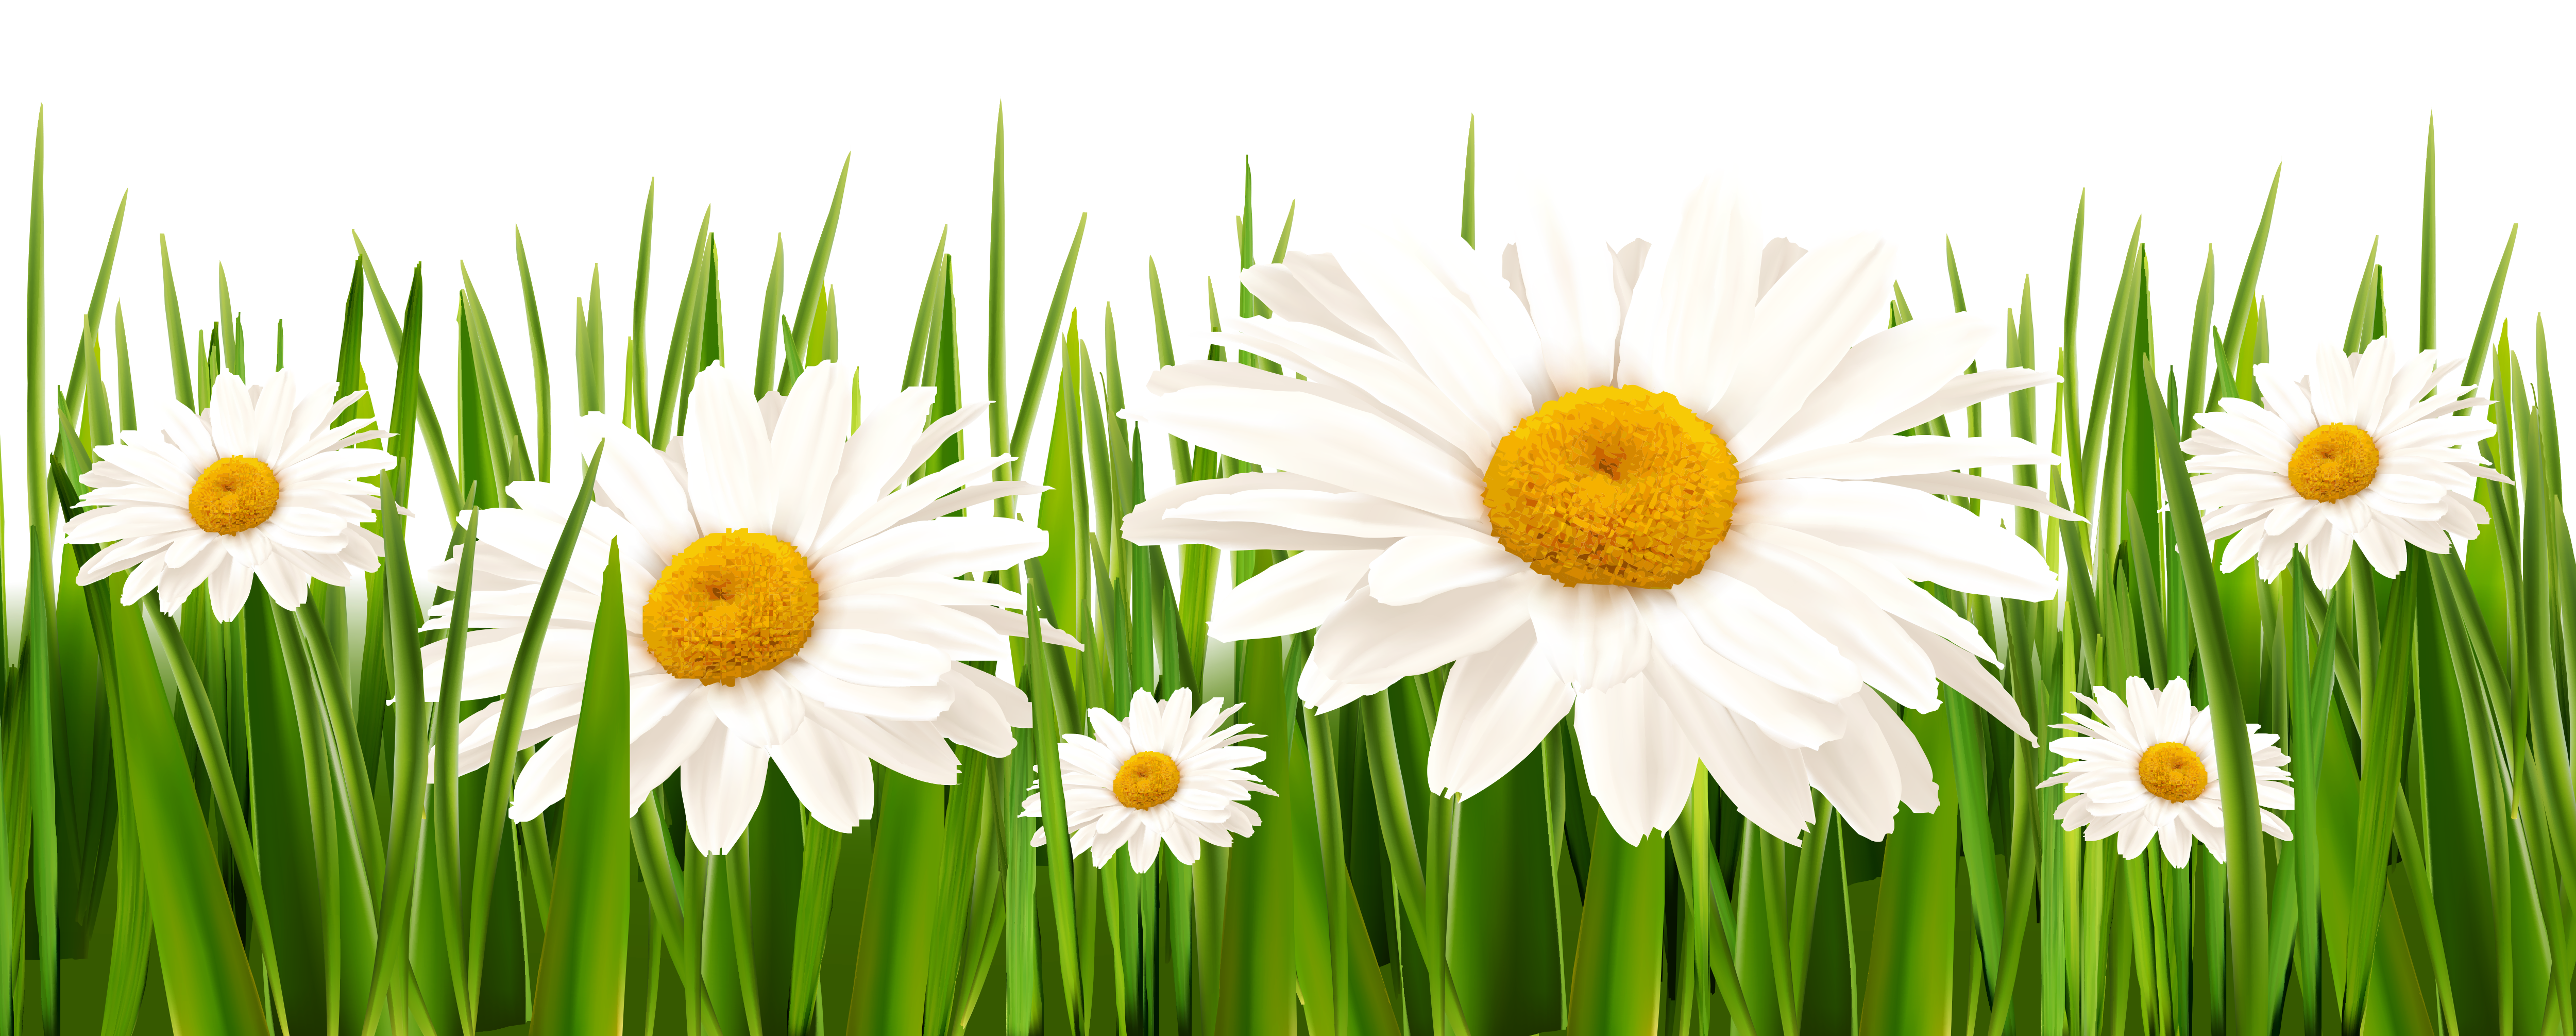 free clipart grass and flowers - photo #28